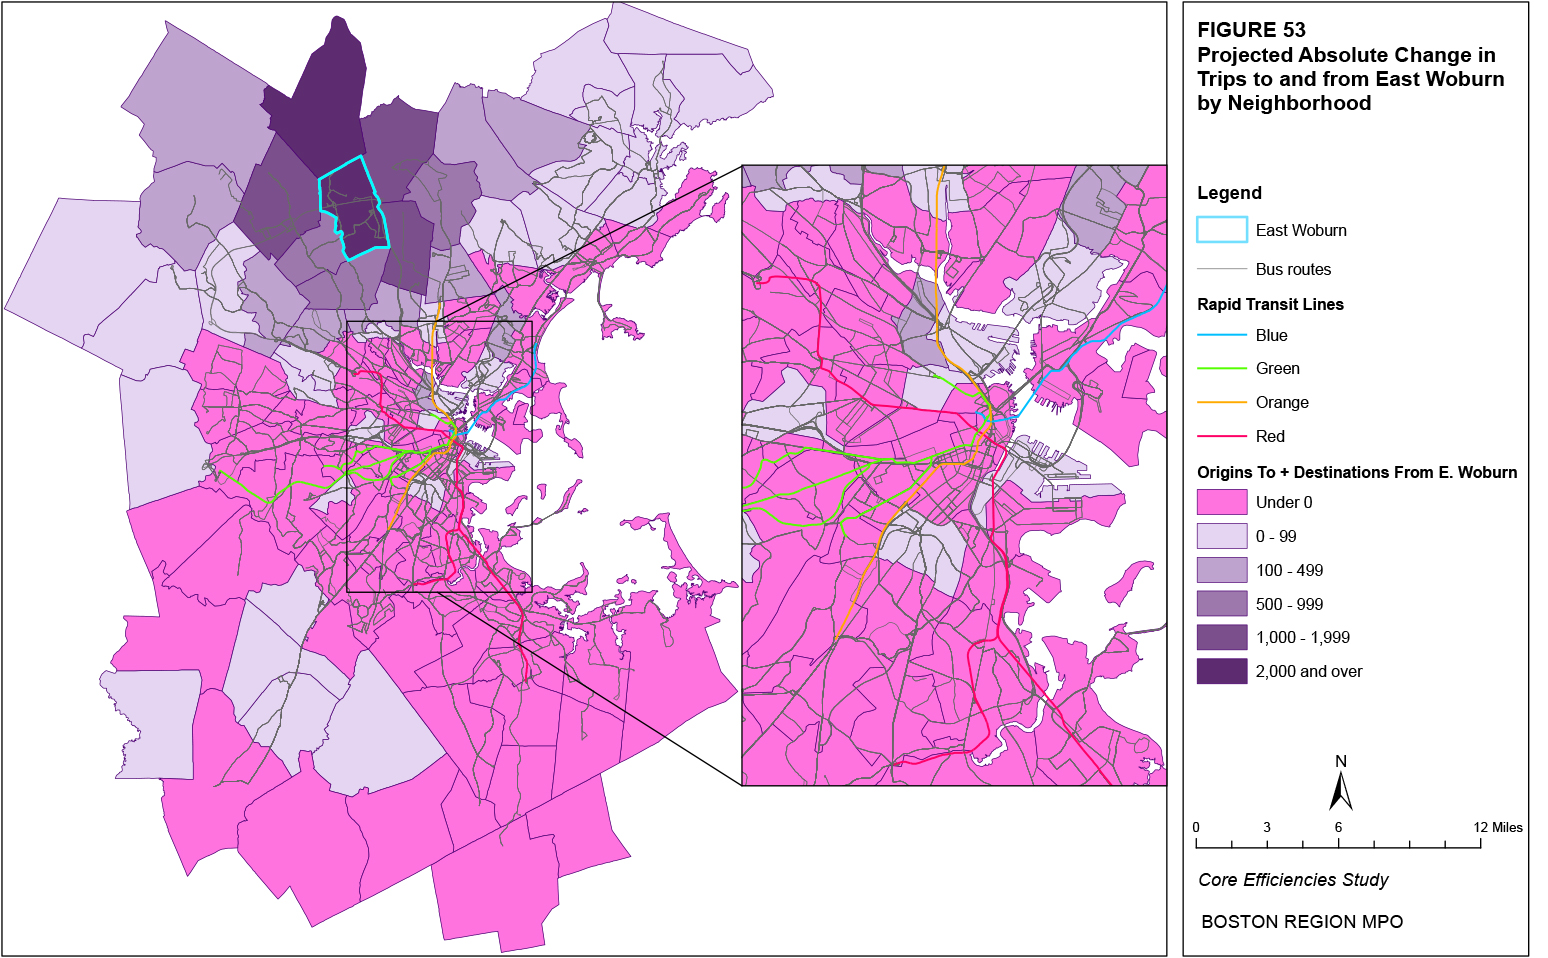 This map shows the projected absolute change in trips to and from the East Woburn neighborhood by neighborhood.